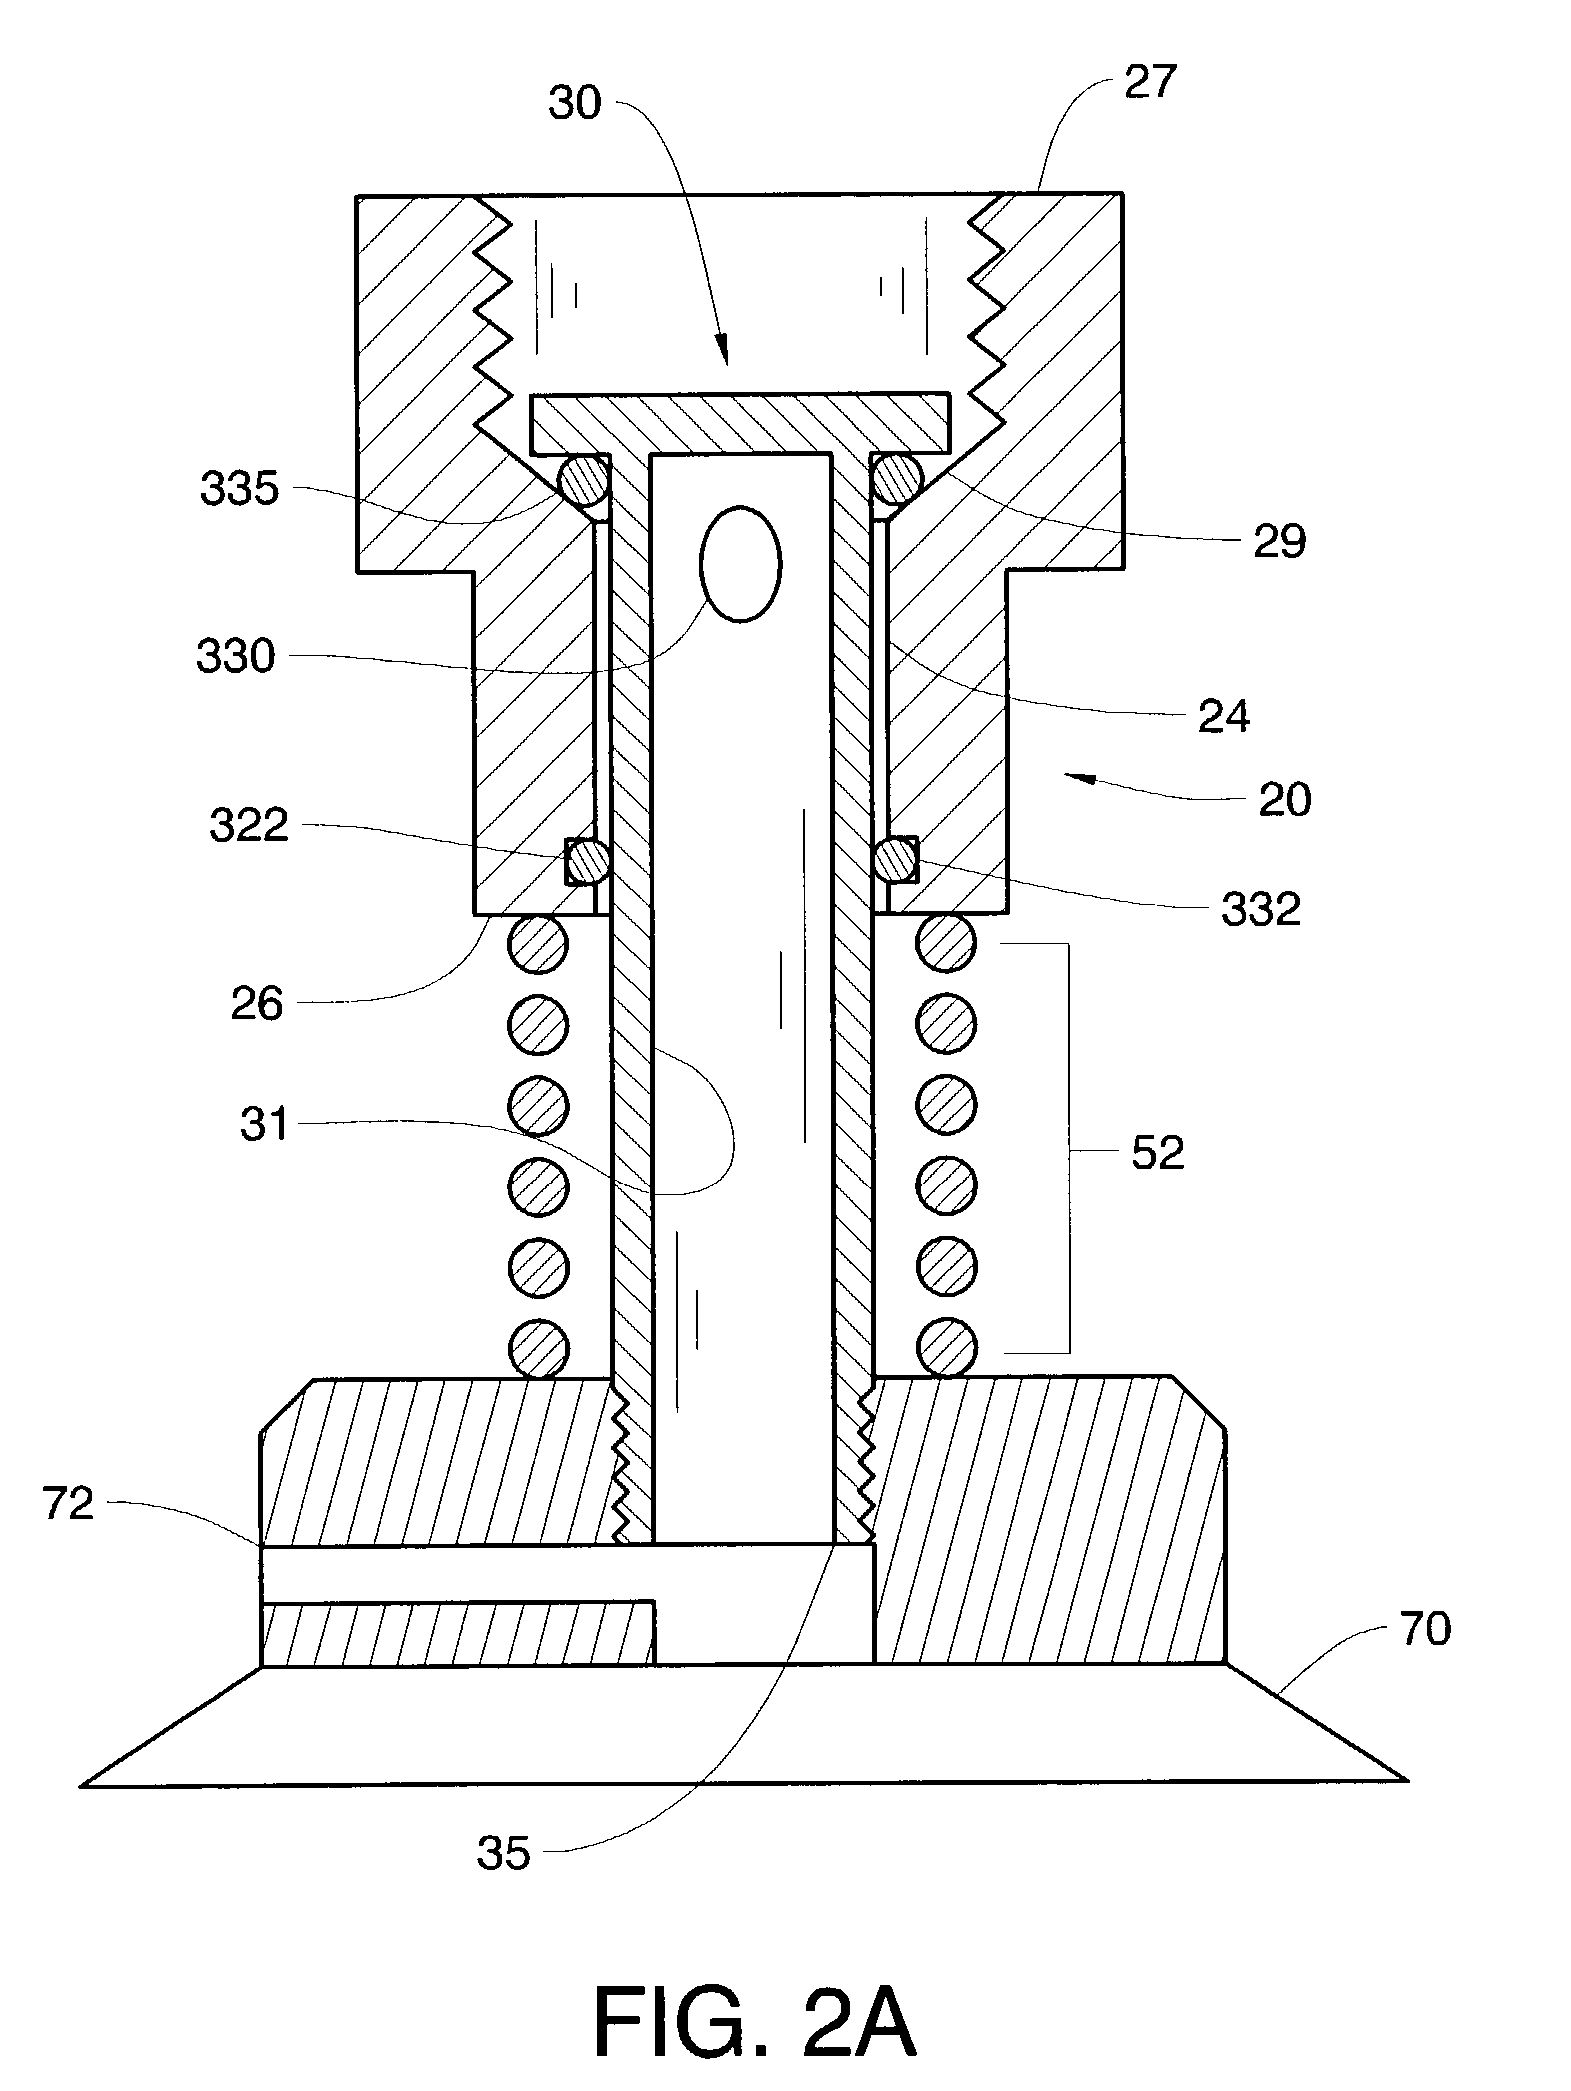 Two way non leaking flow valve with full-open capability